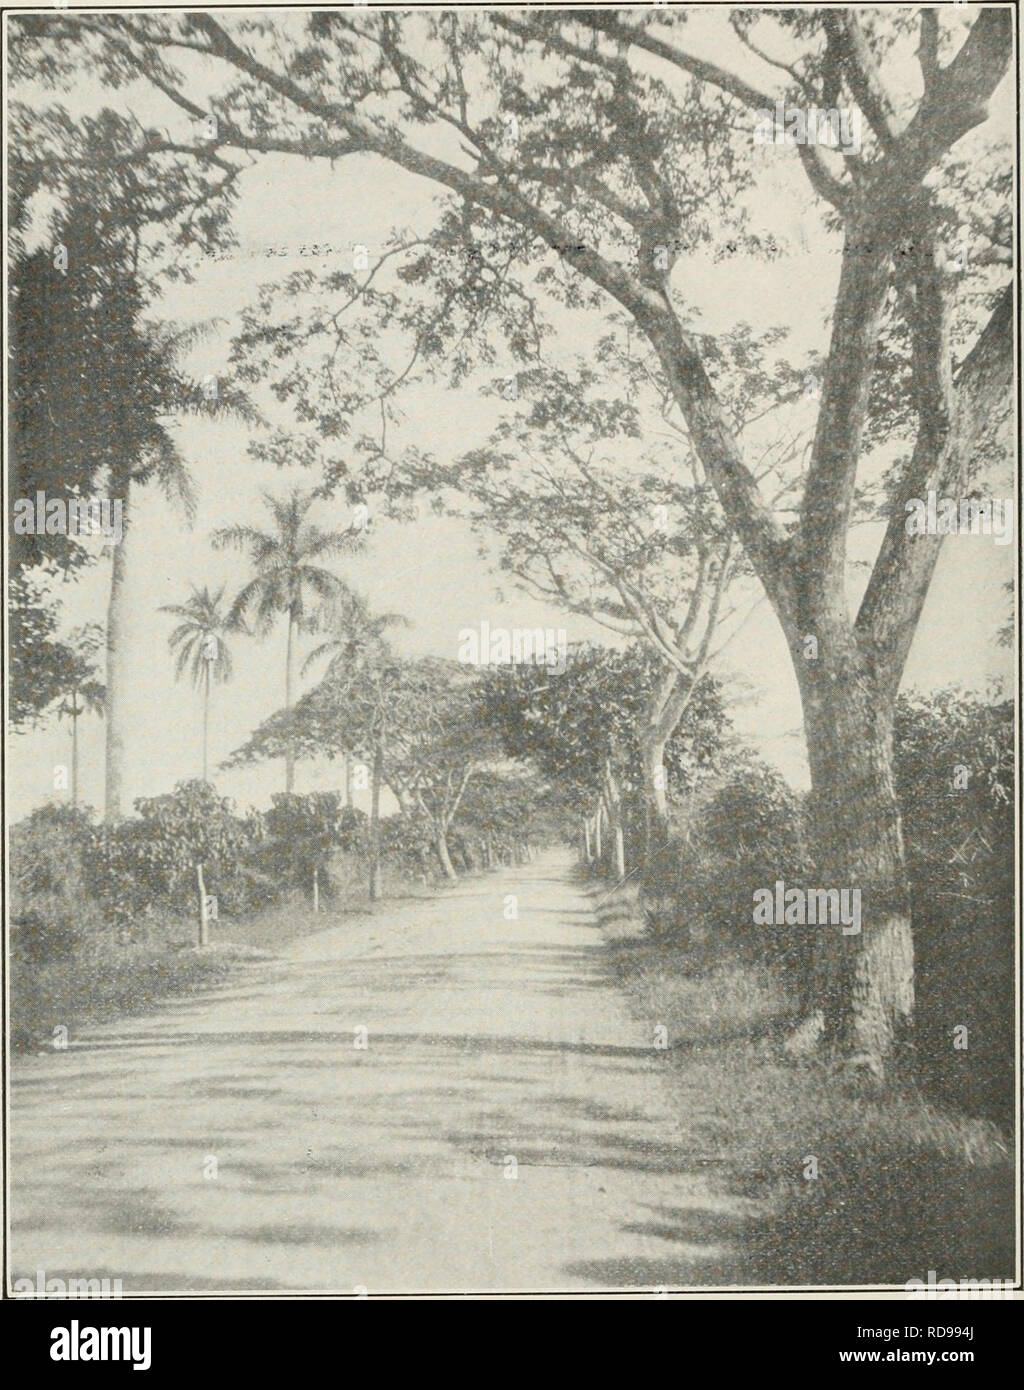 . The Cuba review. Cuba -- Periodicals. 14 THE CUBA REVIEW. Road in Guines, near Matanzas. and also on sugar plantations. The natural slowness of the cart traffic is further impeded in the cities by the narrowness of streets, and the economy of time in the use of motor trucks has been demonstrated under the pressure of war demands for Cuban products. In the country the trucks are used for transporting manu- factured supplies and foodstuffs into the interior, and native products to the cities. While the railway transportation of Cuba has been much improved in recent years, there being now about Stock Photo